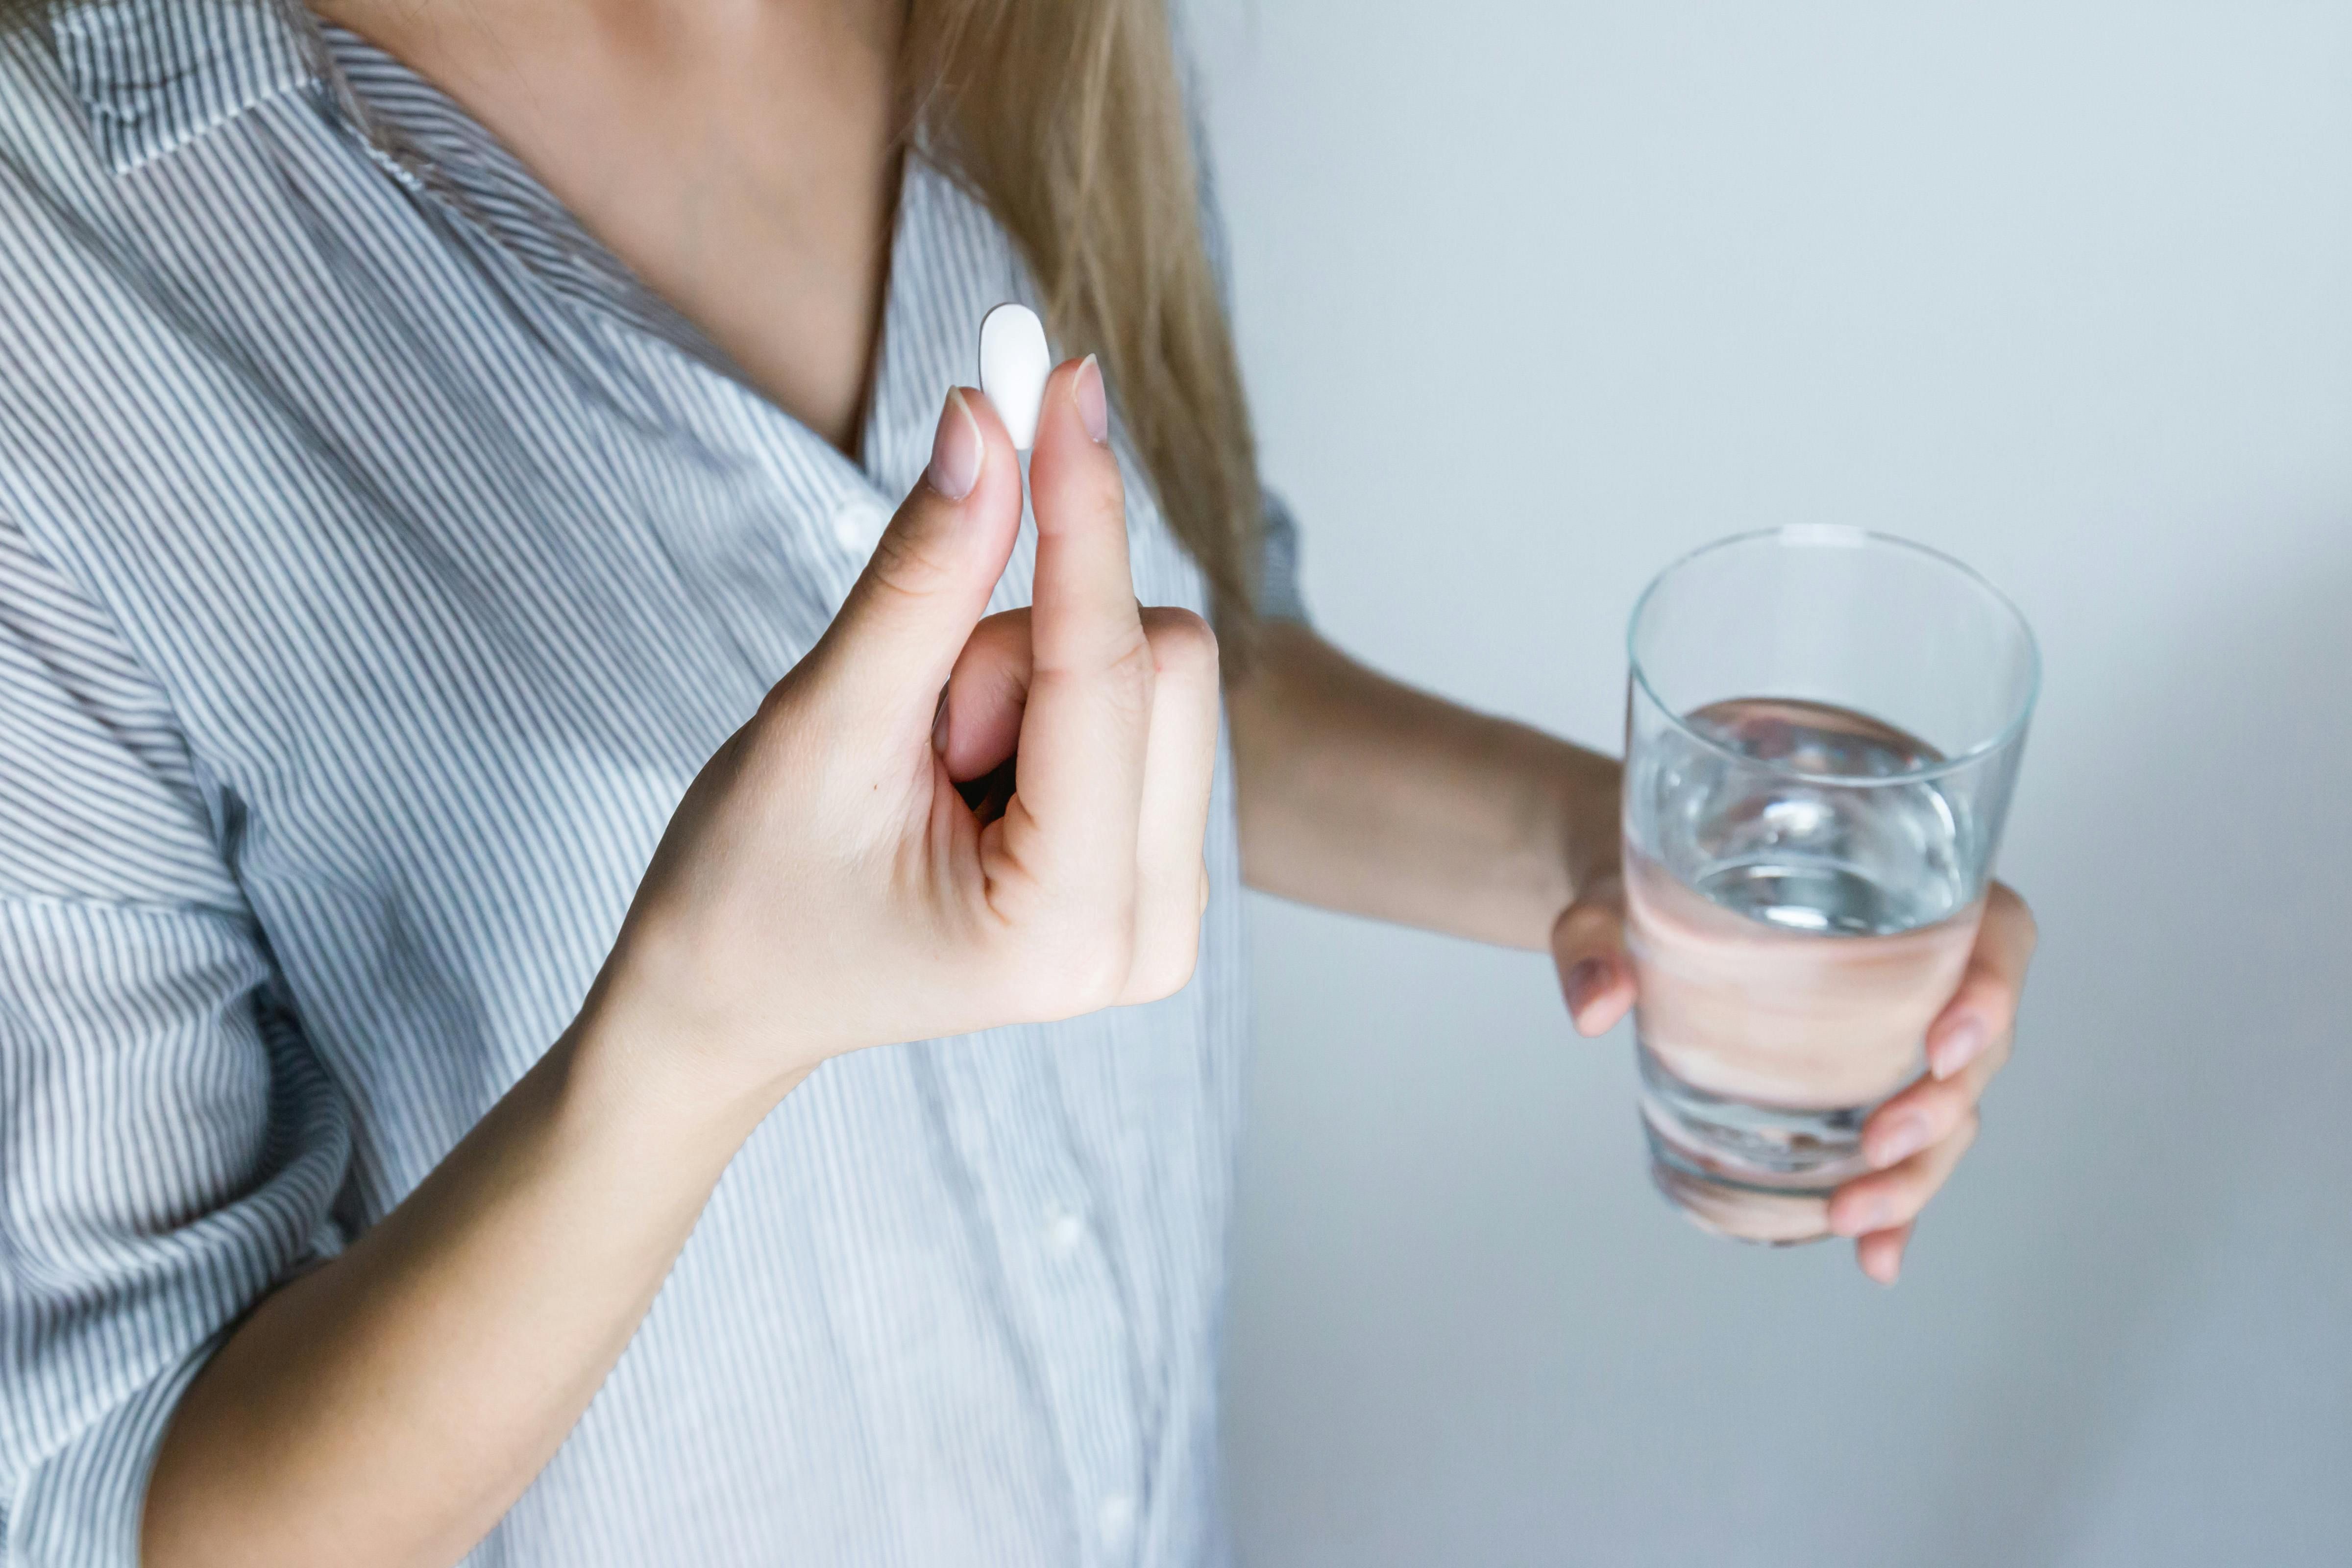 A woman taking an antipsychotic medication during her intermittent fasting window